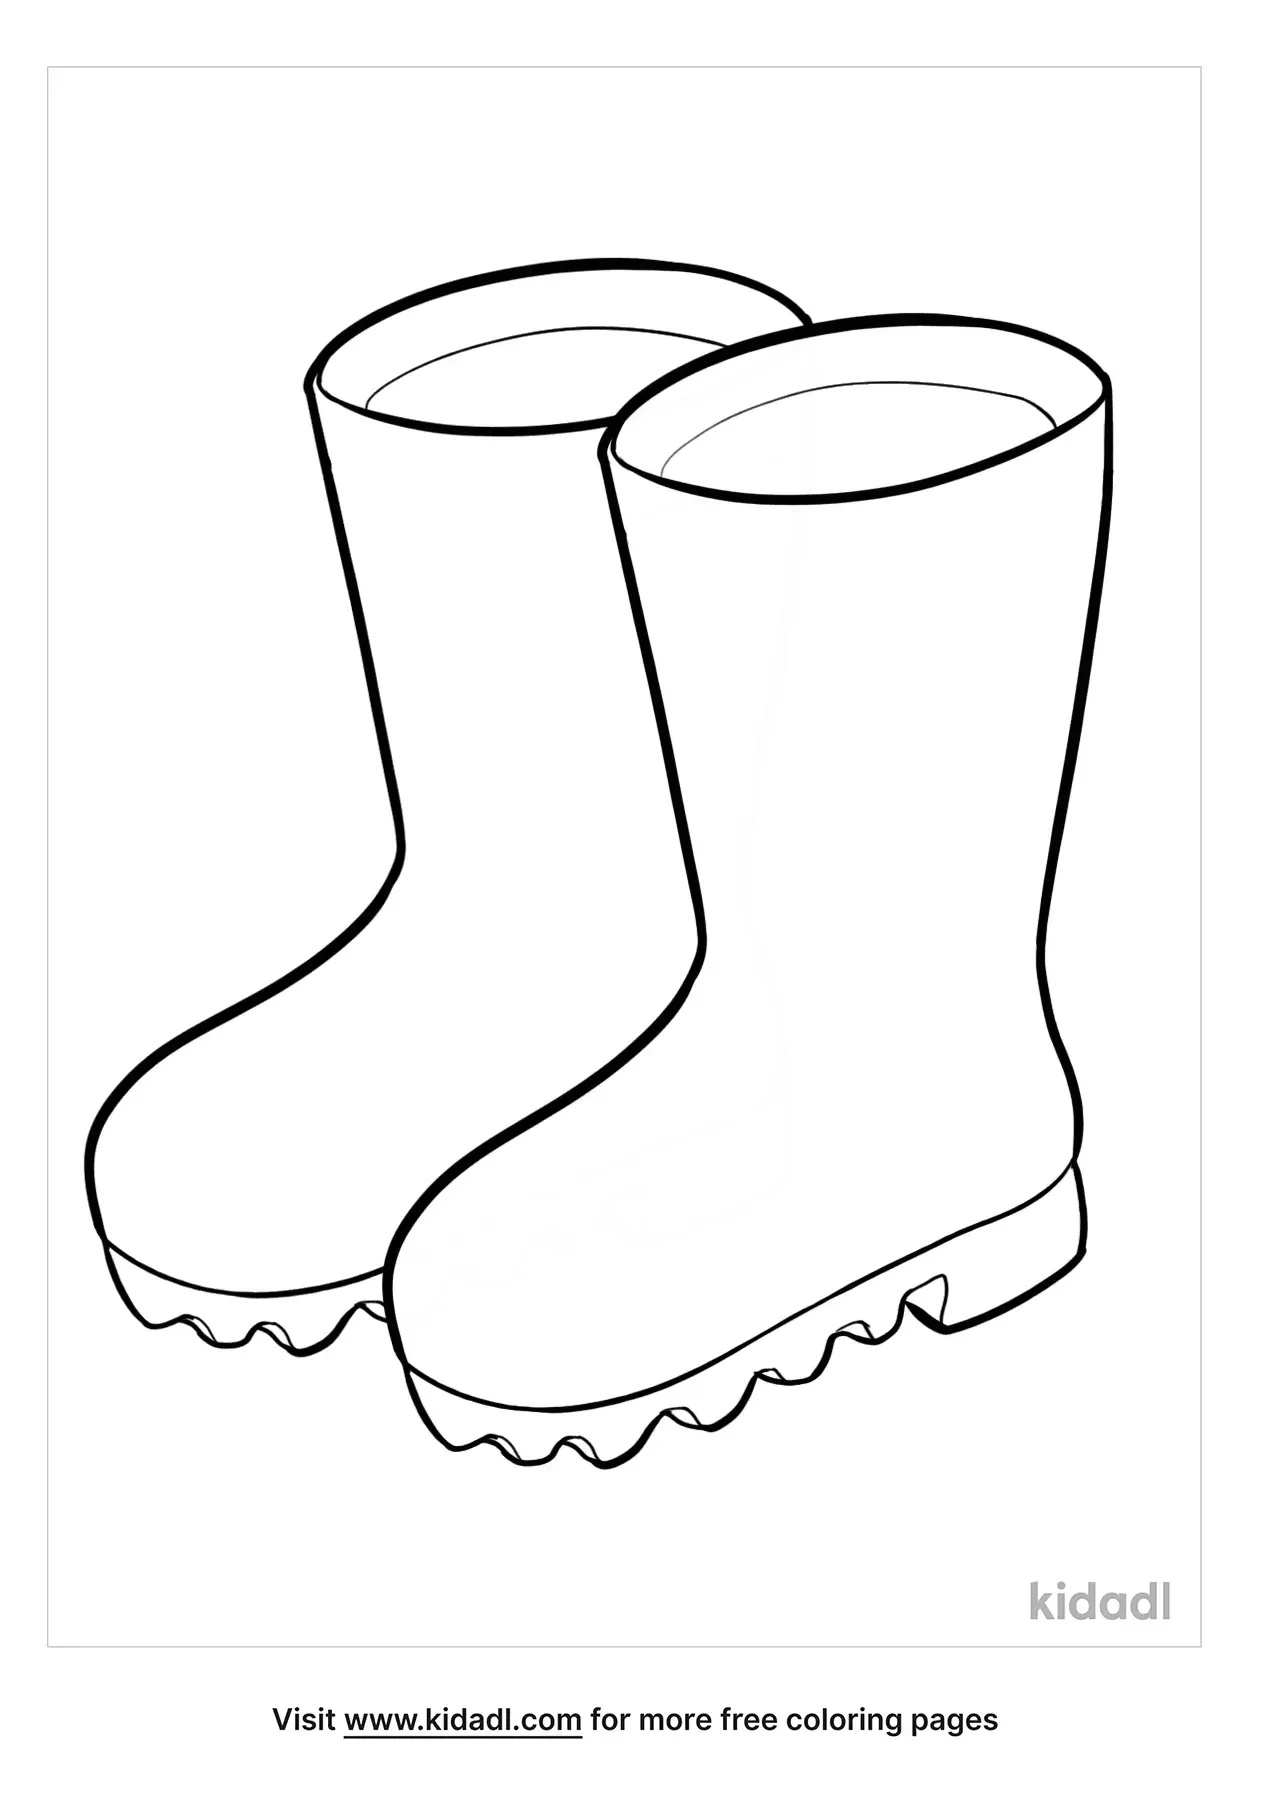 Free Construction Work Boots Coloring Page | Coloring Page Printables ...